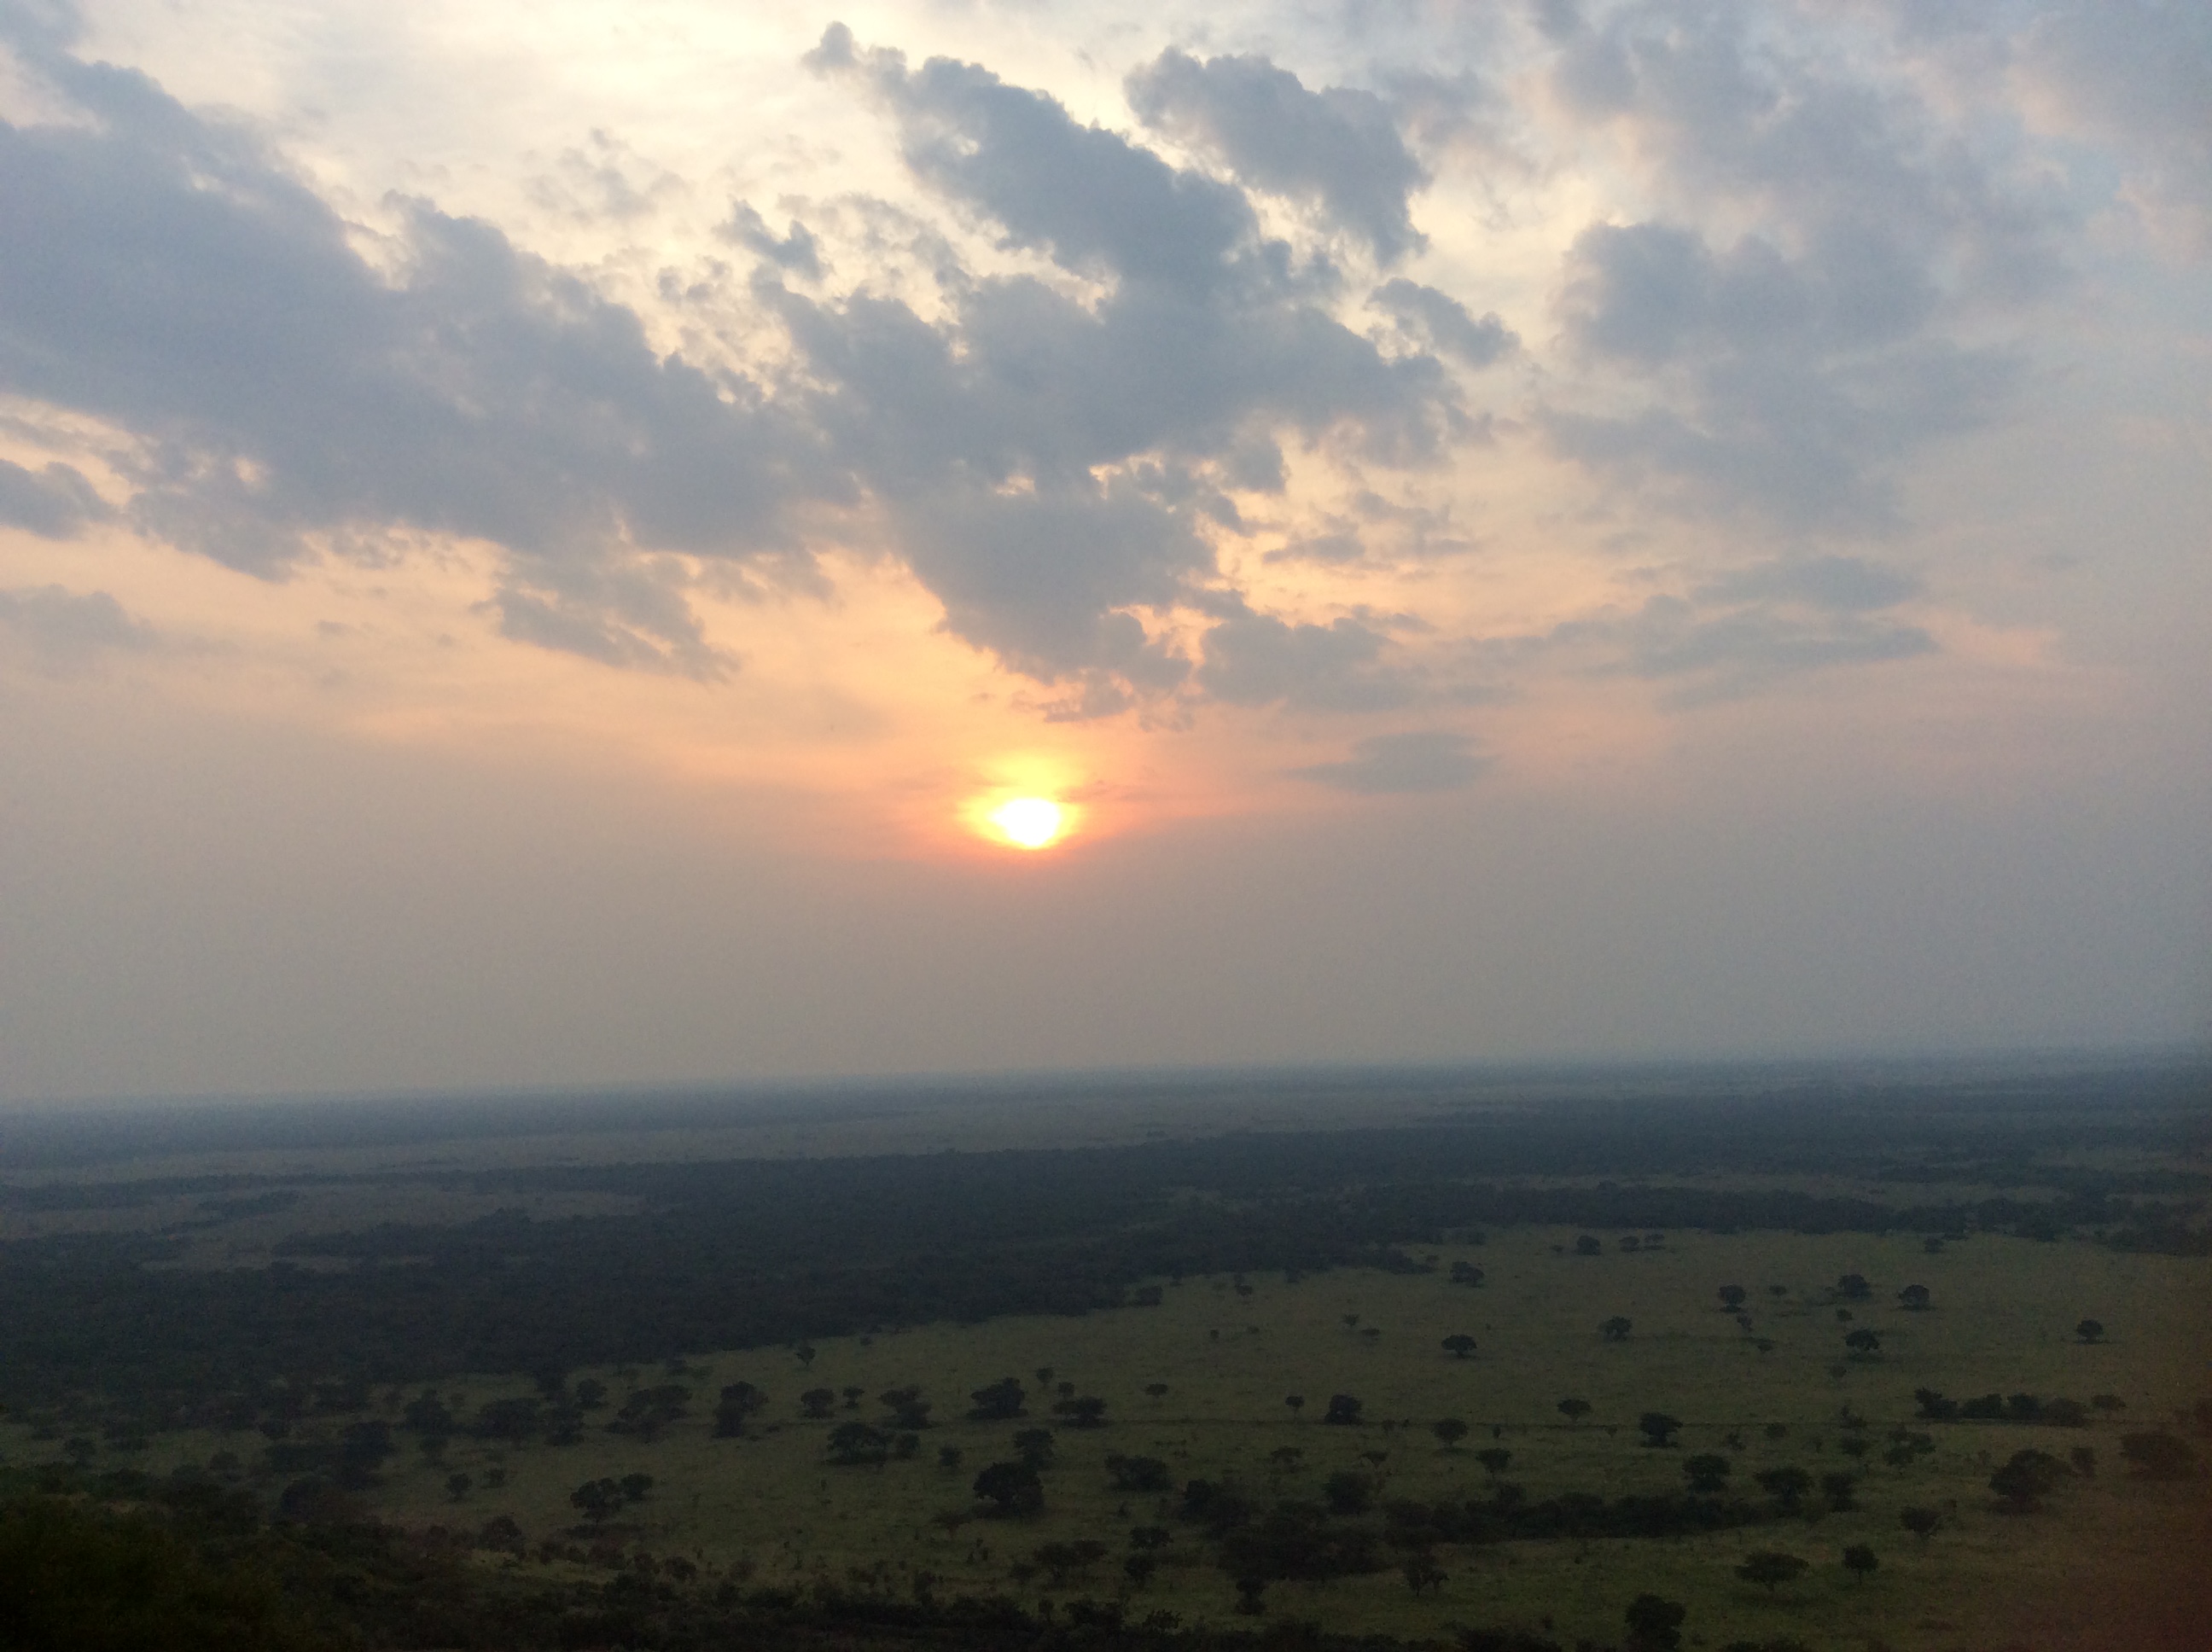 Sunset: As viewed from the Rift Valley Game Lodge